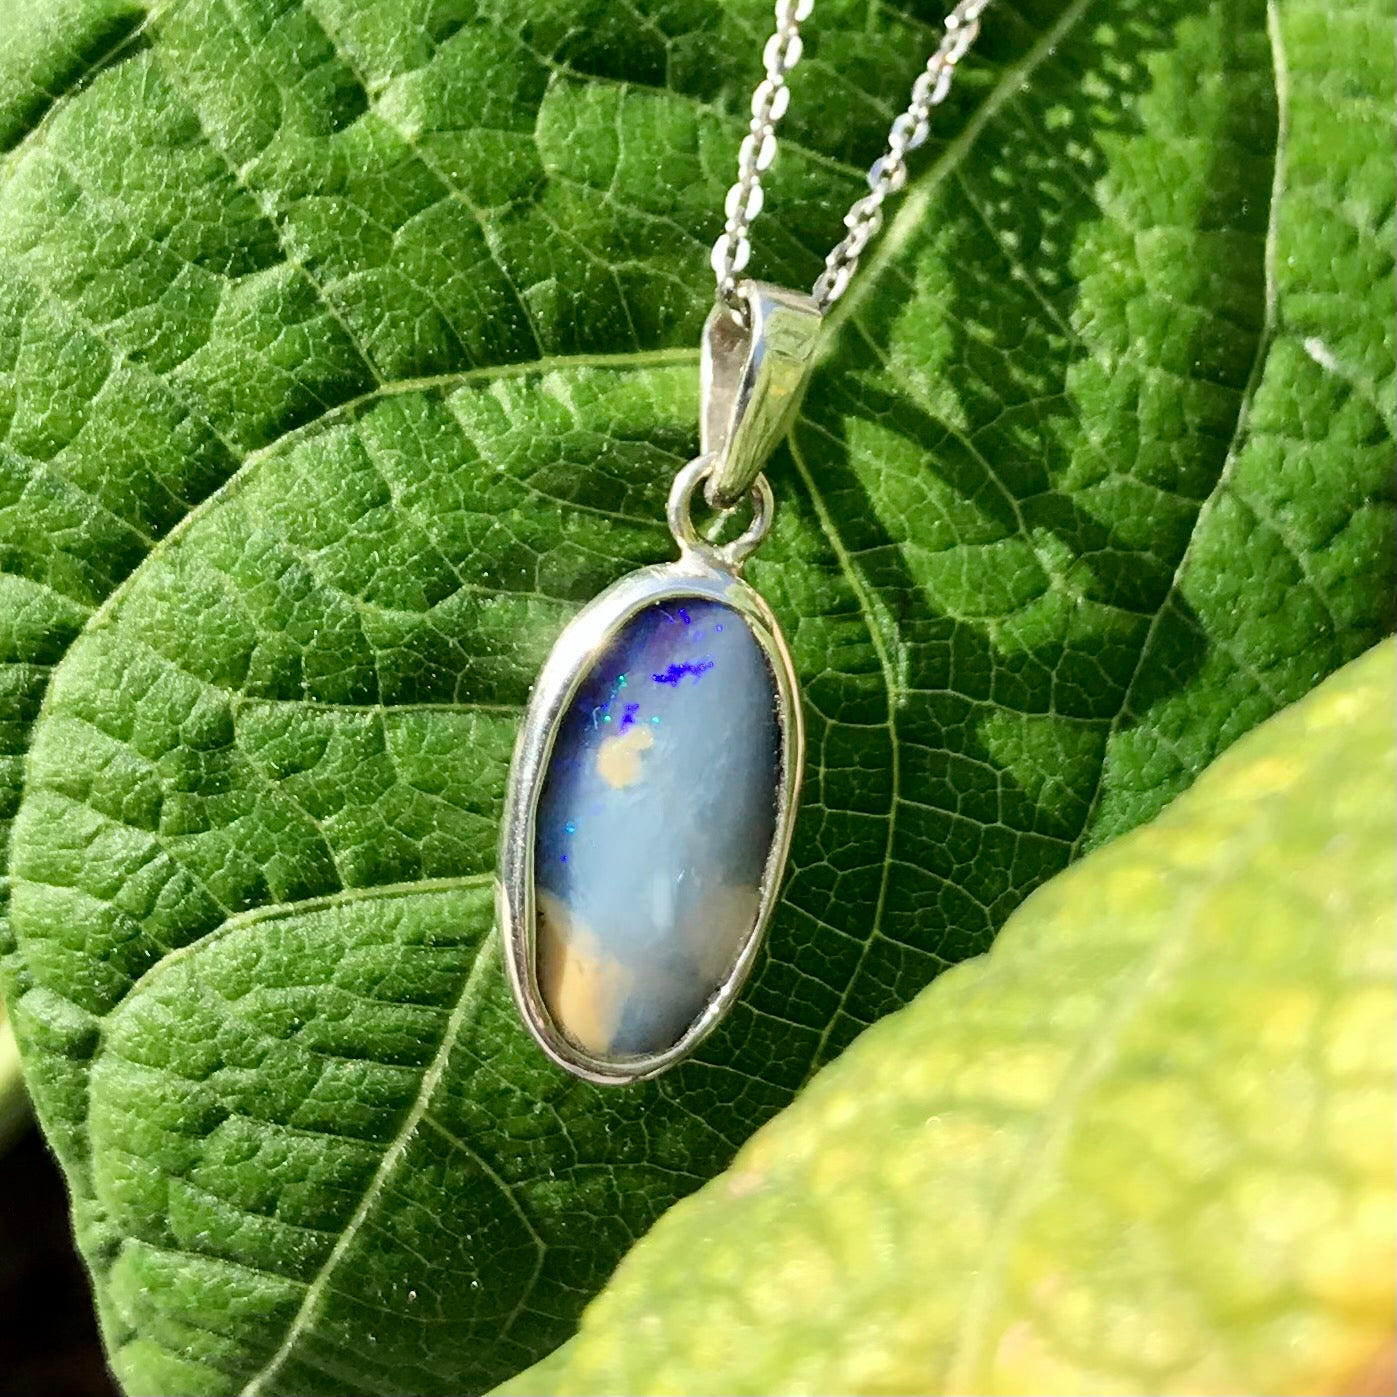 A photo of a Quilpie Australian blue boulder opal with tan matrix set into a sterling silver bezel pendant.  The opal resembles a beach with tan sand matrix and a blue ocean of color.  The pendant is on a sterling silver cable chain and against a green leaf backdrop.